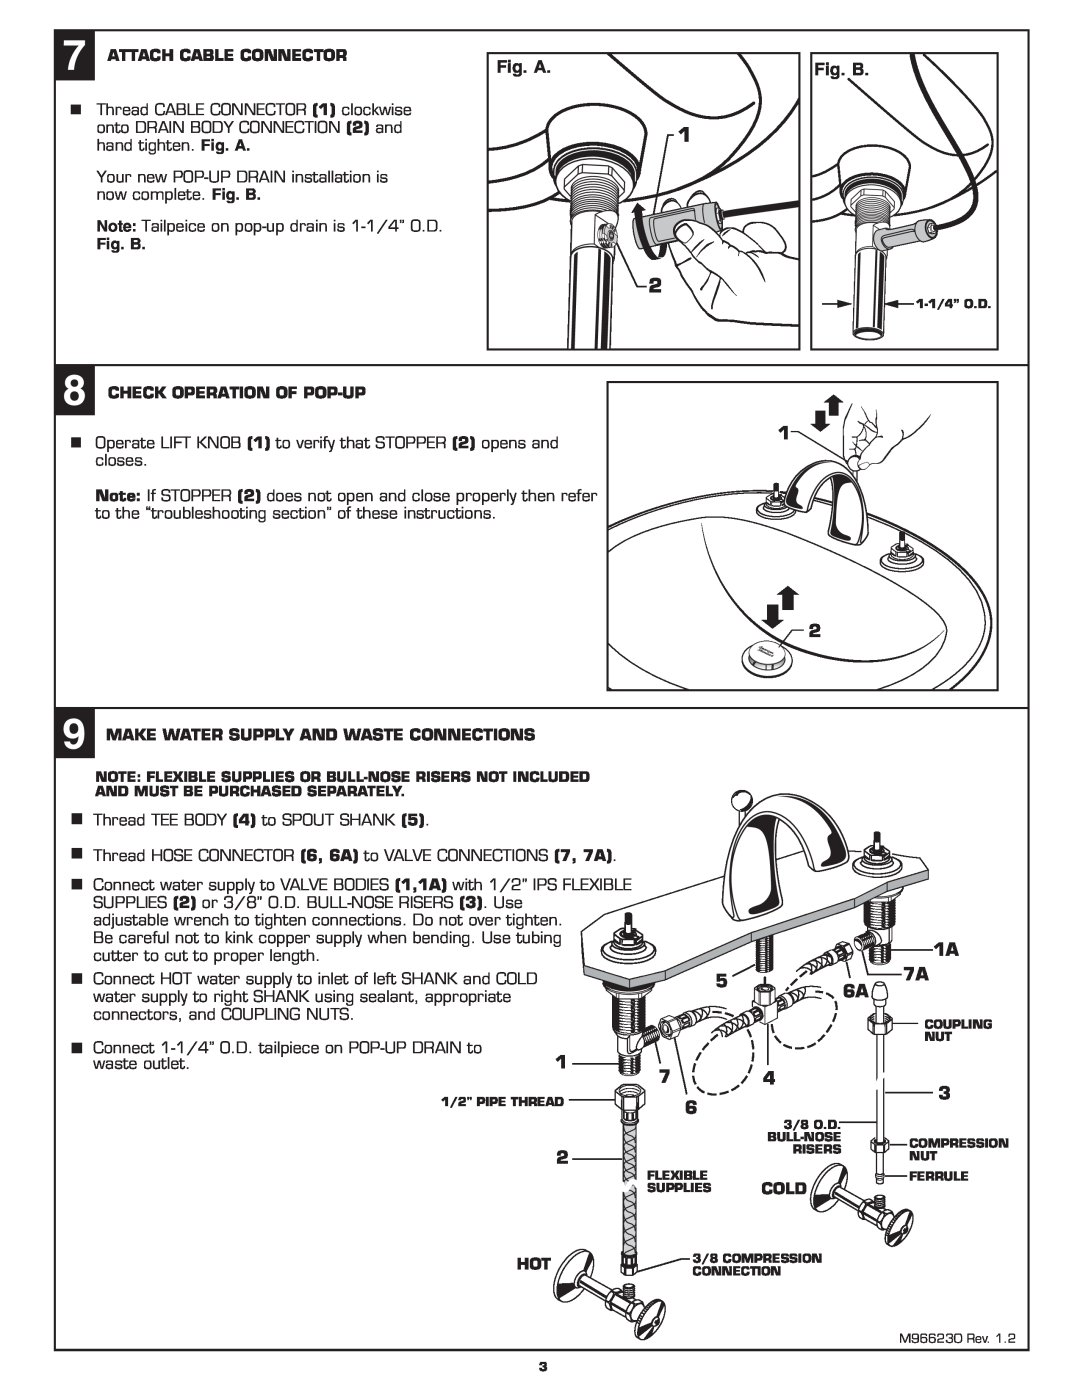 American Standard 8871 installation instructions Fig. A 